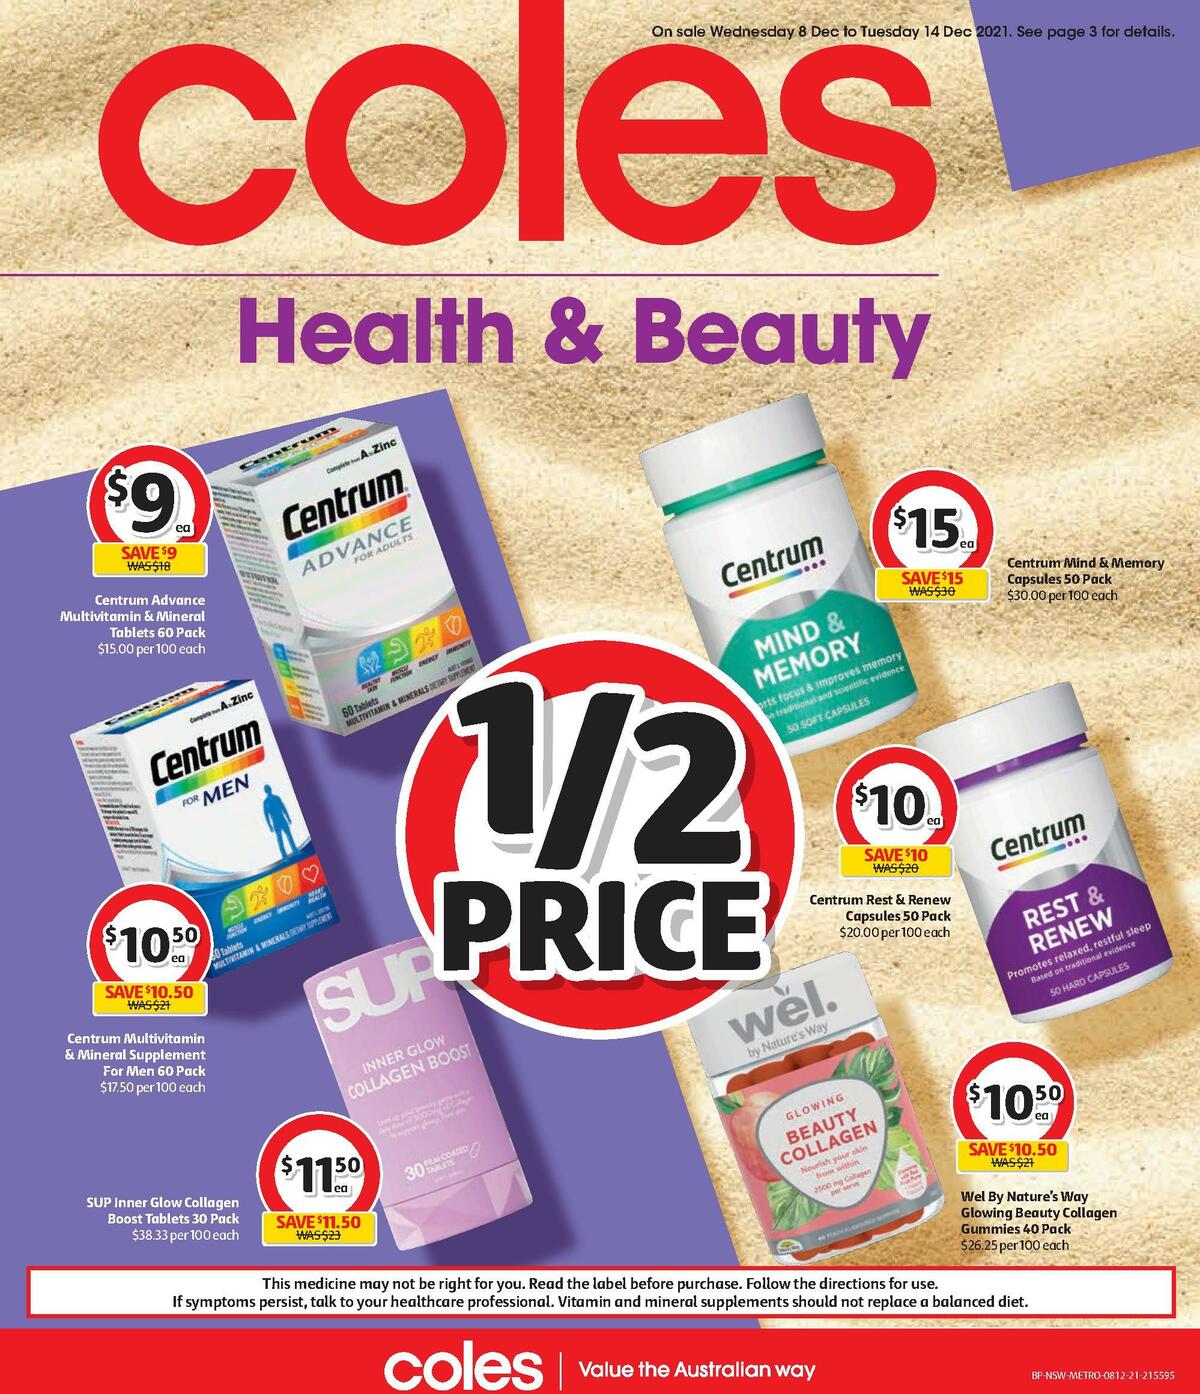 Coles Health & Beauty Catalogues from 8 December